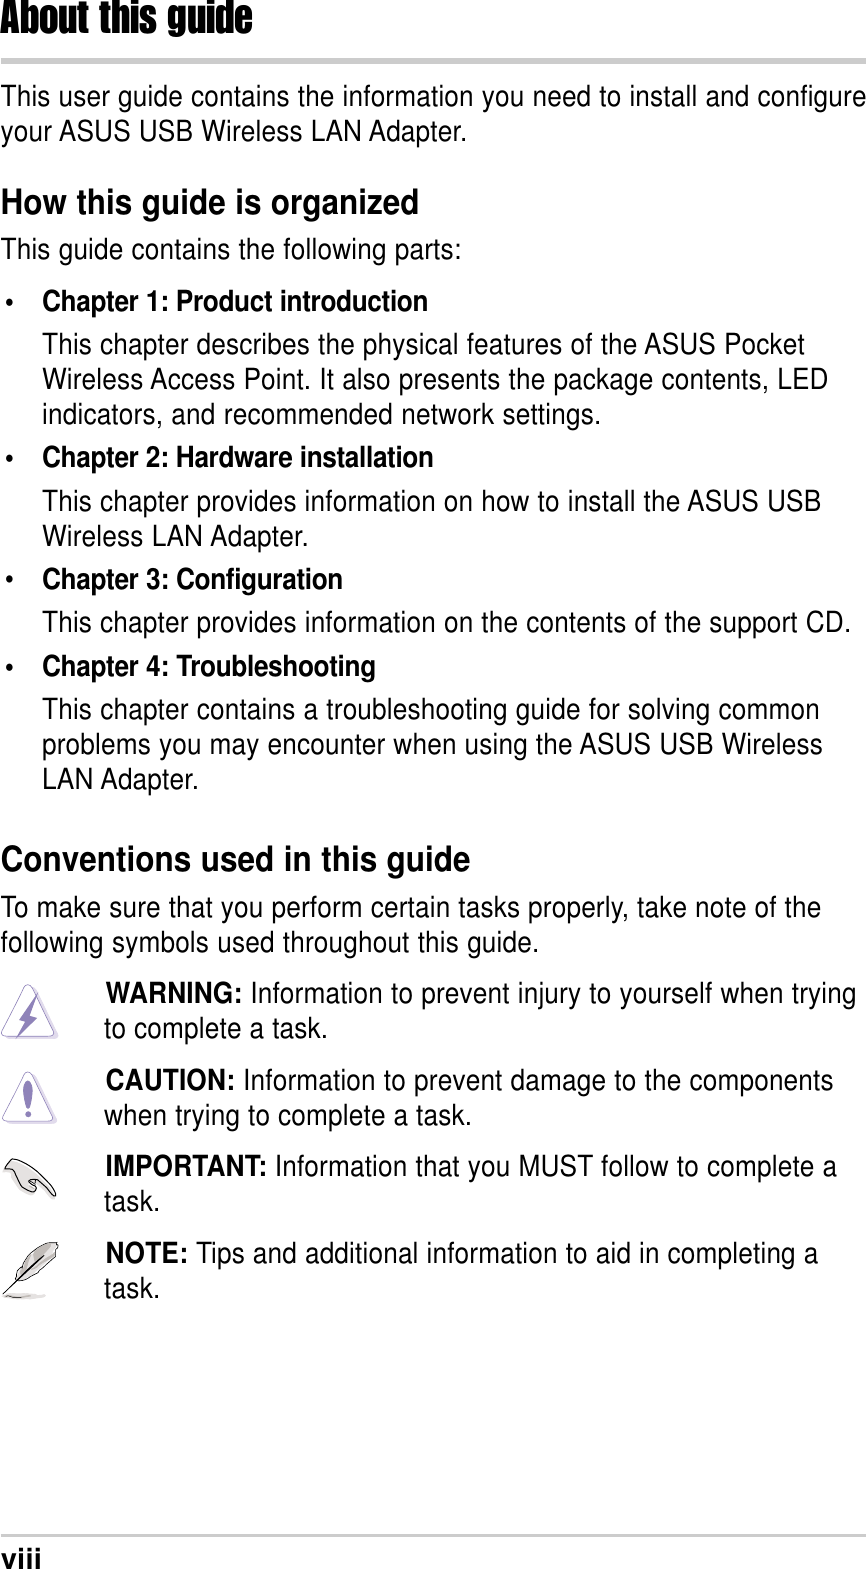 viiiThis user guide contains the information you need to install and configureyour ASUS USB Wireless LAN Adapter.How this guide is organizedThis guide contains the following parts:• Chapter 1: Product introductionThis chapter describes the physical features of the ASUS PocketWireless Access Point. It also presents the package contents, LEDindicators, and recommended network settings.• Chapter 2: Hardware installationThis chapter provides information on how to install the ASUS USBWireless LAN Adapter.•Chapter 3: ConfigurationThis chapter provides information on the contents of the support CD.• Chapter 4: TroubleshootingThis chapter contains a troubleshooting guide for solving commonproblems you may encounter when using the ASUS USB WirelessLAN Adapter.About this guideConventions used in this guideTo make sure that you perform certain tasks properly, take note of thefollowing symbols used throughout this guide.WARNING: Information to prevent injury to yourself when tryingto complete a task.CAUTION: Information to prevent damage to the componentswhen trying to complete a task.IMPORTANT: Information that you MUST follow to complete atask.NOTE: Tips and additional information to aid in completing atask.